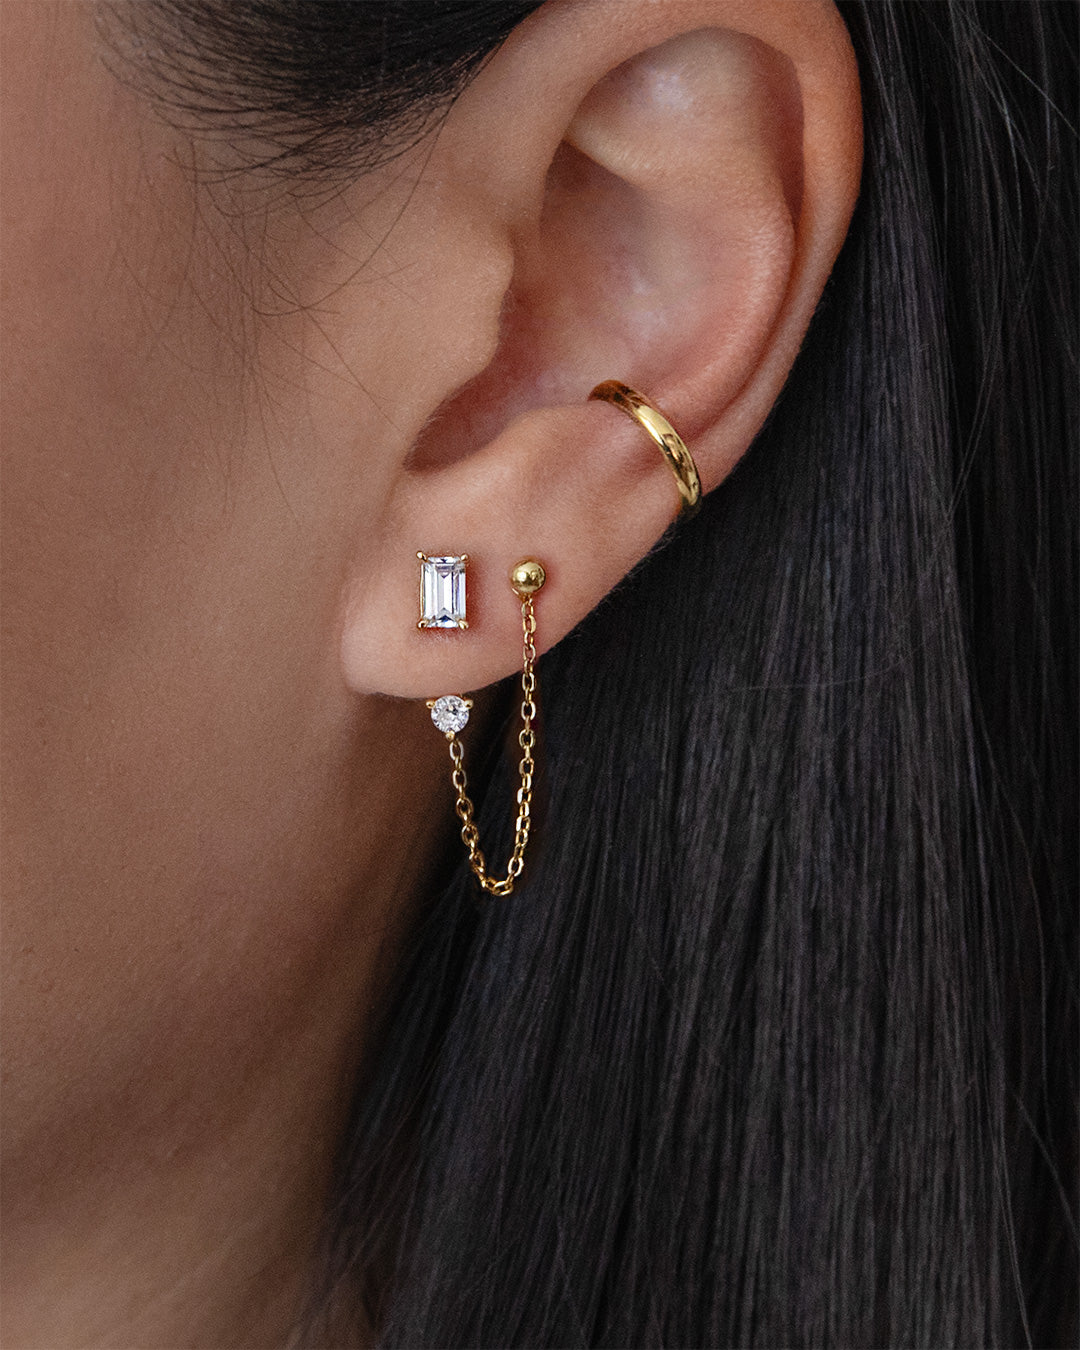 Earring Size Guide | The Jewellery Room